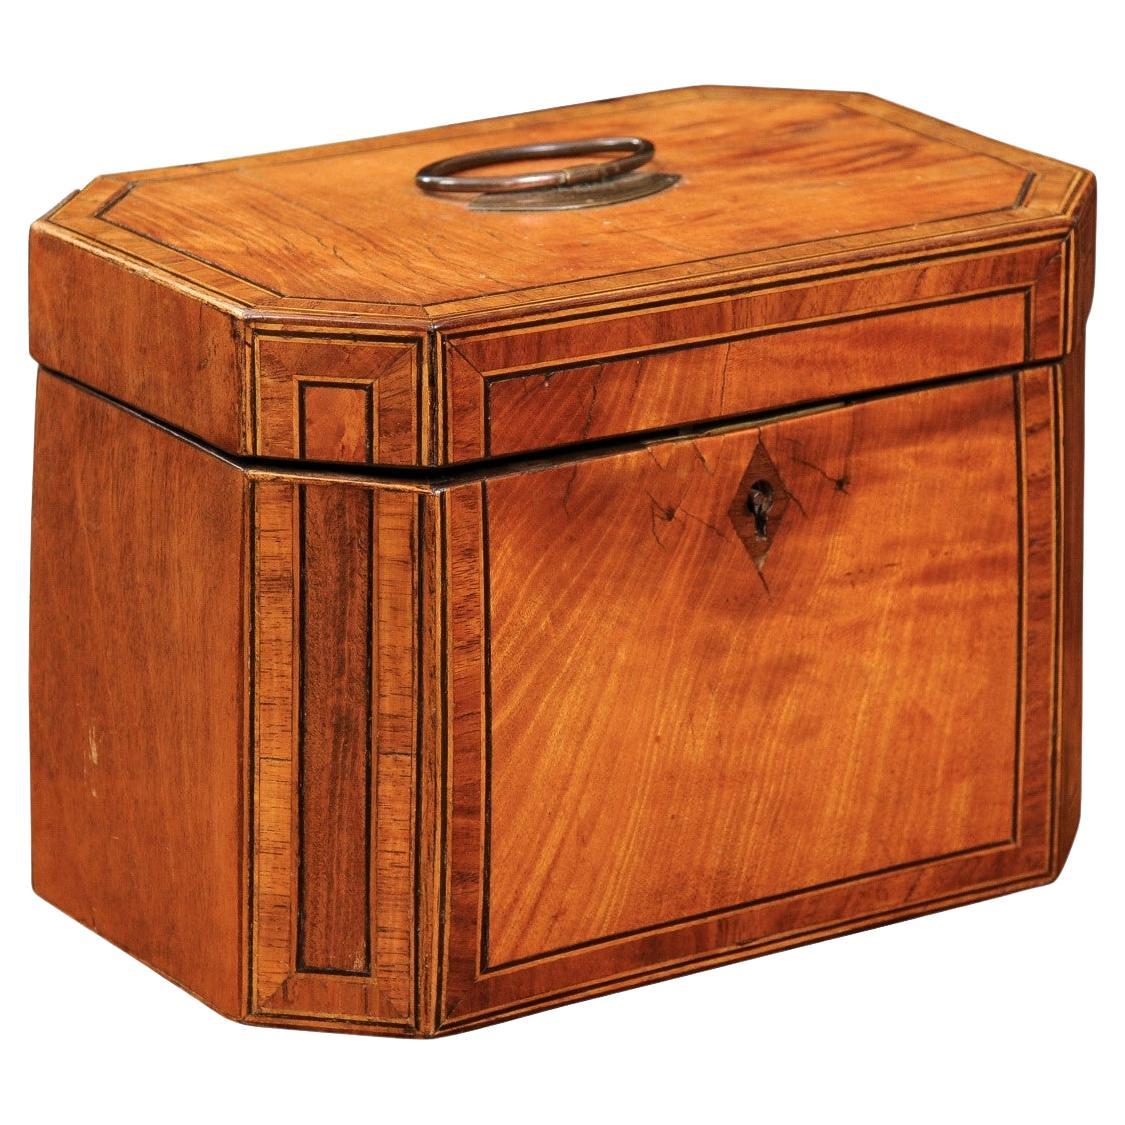  English Octagonal Satinwood Tea Caddy with Rosewood Cross Banding  For Sale